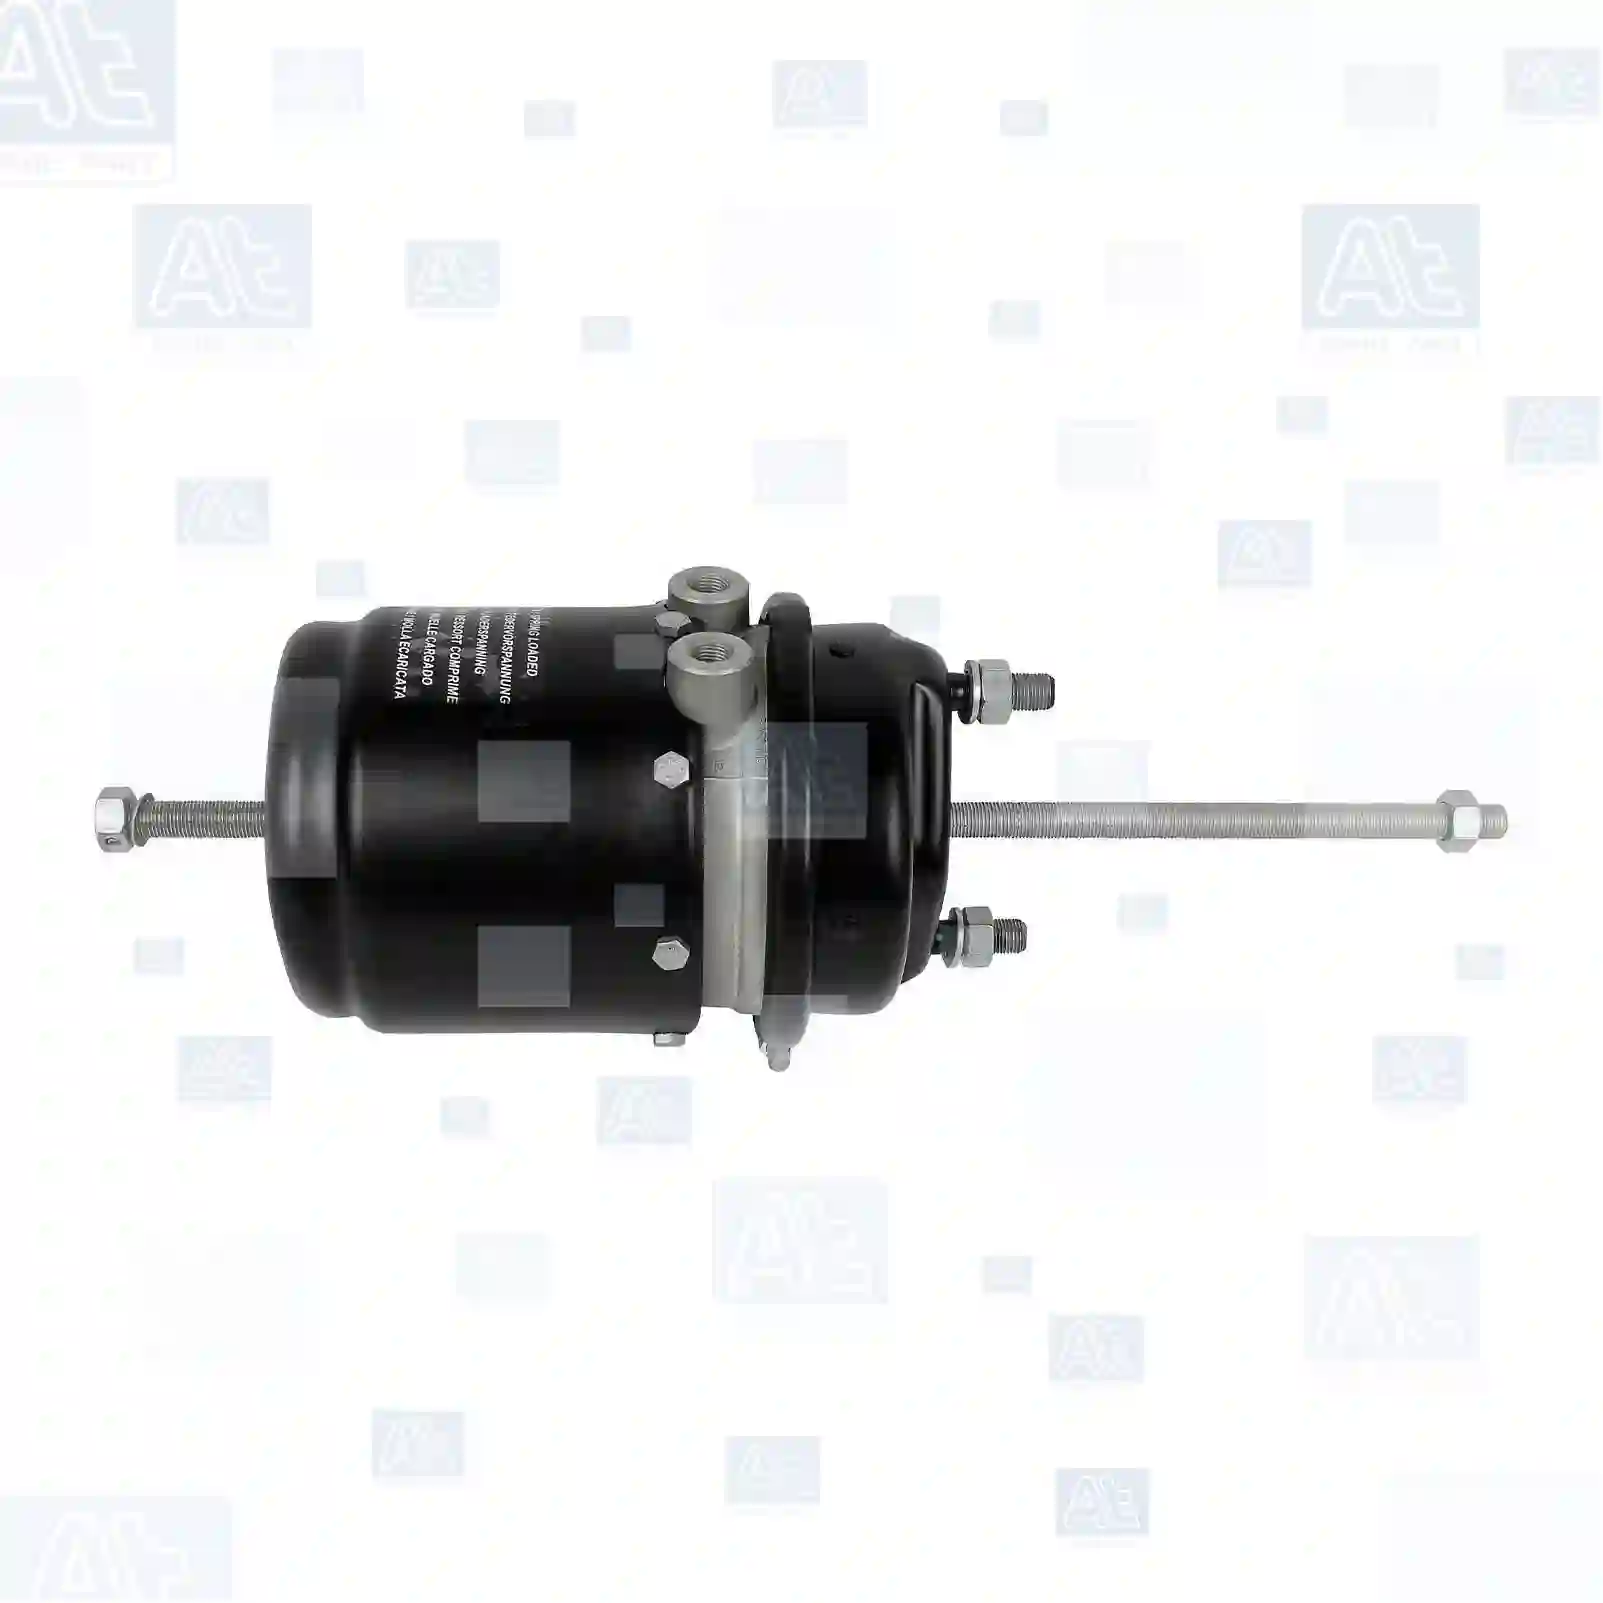 Spring brake cylinder, 77714512, 7420438487, 7420533196, 10570531, 10570534, 10571751, 10571770, 1115862, 1331412, 1331416, 1571770, 295390, 302268, 365928, 365929, 570531, 570534, 571751, 571770, 1606835, 1606836, 1606887, 1609803, 1626182, 1626183, 1626184, 1626185, 1626445, 1626446, 1629514, 1629515, 20438487, 20533195, 20533196, 3963094, 3963095, 5003225, 5003226, 5003484, 5003485, 8112624, 8112625, 8113112, 8113540, 8113541, 8113558, 8118624, 8118625, 8119540, 8119541, 8154233, 8154234, 85000581, ZG50770-0008 ||  77714512 At Spare Part | Engine, Accelerator Pedal, Camshaft, Connecting Rod, Crankcase, Crankshaft, Cylinder Head, Engine Suspension Mountings, Exhaust Manifold, Exhaust Gas Recirculation, Filter Kits, Flywheel Housing, General Overhaul Kits, Engine, Intake Manifold, Oil Cleaner, Oil Cooler, Oil Filter, Oil Pump, Oil Sump, Piston & Liner, Sensor & Switch, Timing Case, Turbocharger, Cooling System, Belt Tensioner, Coolant Filter, Coolant Pipe, Corrosion Prevention Agent, Drive, Expansion Tank, Fan, Intercooler, Monitors & Gauges, Radiator, Thermostat, V-Belt / Timing belt, Water Pump, Fuel System, Electronical Injector Unit, Feed Pump, Fuel Filter, cpl., Fuel Gauge Sender,  Fuel Line, Fuel Pump, Fuel Tank, Injection Line Kit, Injection Pump, Exhaust System, Clutch & Pedal, Gearbox, Propeller Shaft, Axles, Brake System, Hubs & Wheels, Suspension, Leaf Spring, Universal Parts / Accessories, Steering, Electrical System, Cabin Spring brake cylinder, 77714512, 7420438487, 7420533196, 10570531, 10570534, 10571751, 10571770, 1115862, 1331412, 1331416, 1571770, 295390, 302268, 365928, 365929, 570531, 570534, 571751, 571770, 1606835, 1606836, 1606887, 1609803, 1626182, 1626183, 1626184, 1626185, 1626445, 1626446, 1629514, 1629515, 20438487, 20533195, 20533196, 3963094, 3963095, 5003225, 5003226, 5003484, 5003485, 8112624, 8112625, 8113112, 8113540, 8113541, 8113558, 8118624, 8118625, 8119540, 8119541, 8154233, 8154234, 85000581, ZG50770-0008 ||  77714512 At Spare Part | Engine, Accelerator Pedal, Camshaft, Connecting Rod, Crankcase, Crankshaft, Cylinder Head, Engine Suspension Mountings, Exhaust Manifold, Exhaust Gas Recirculation, Filter Kits, Flywheel Housing, General Overhaul Kits, Engine, Intake Manifold, Oil Cleaner, Oil Cooler, Oil Filter, Oil Pump, Oil Sump, Piston & Liner, Sensor & Switch, Timing Case, Turbocharger, Cooling System, Belt Tensioner, Coolant Filter, Coolant Pipe, Corrosion Prevention Agent, Drive, Expansion Tank, Fan, Intercooler, Monitors & Gauges, Radiator, Thermostat, V-Belt / Timing belt, Water Pump, Fuel System, Electronical Injector Unit, Feed Pump, Fuel Filter, cpl., Fuel Gauge Sender,  Fuel Line, Fuel Pump, Fuel Tank, Injection Line Kit, Injection Pump, Exhaust System, Clutch & Pedal, Gearbox, Propeller Shaft, Axles, Brake System, Hubs & Wheels, Suspension, Leaf Spring, Universal Parts / Accessories, Steering, Electrical System, Cabin